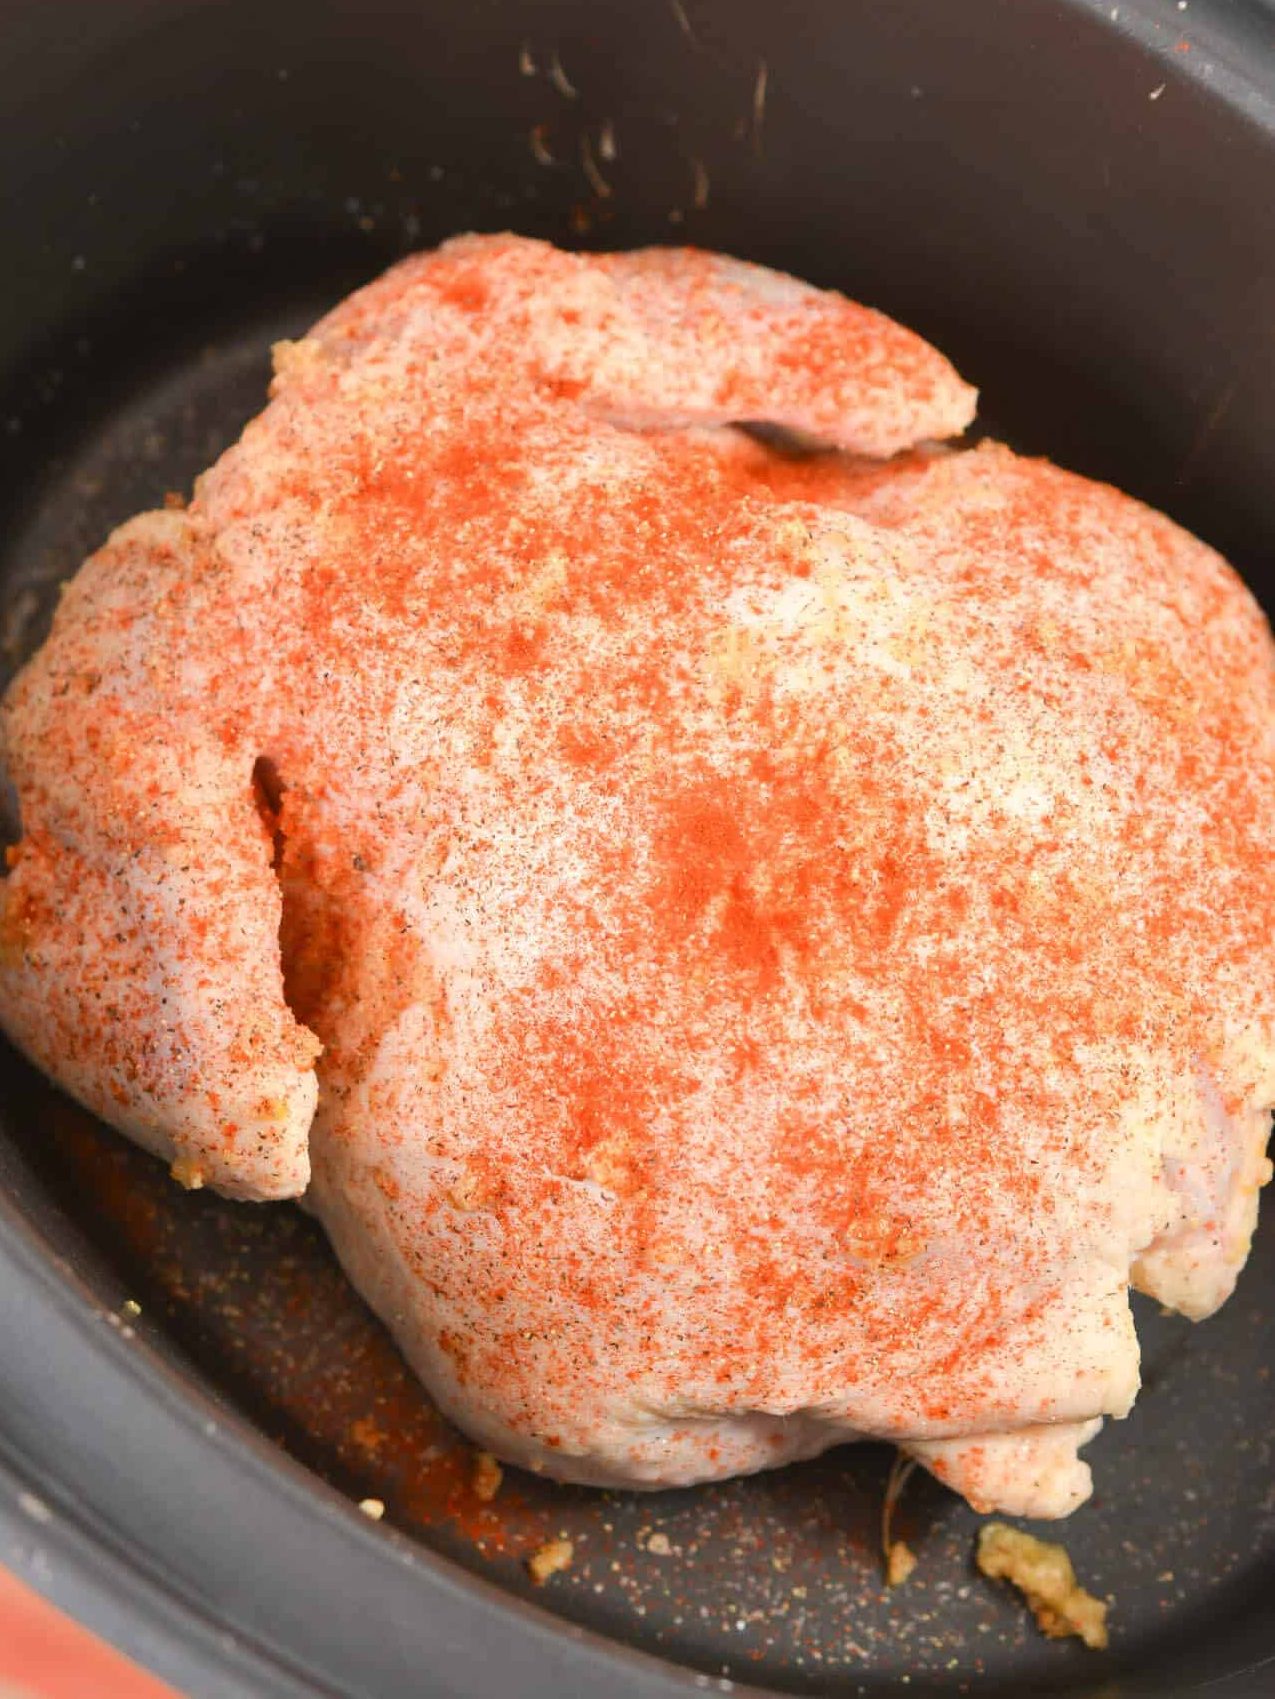 Add paprika, pepper and salt to taste to the outside of the chicken.